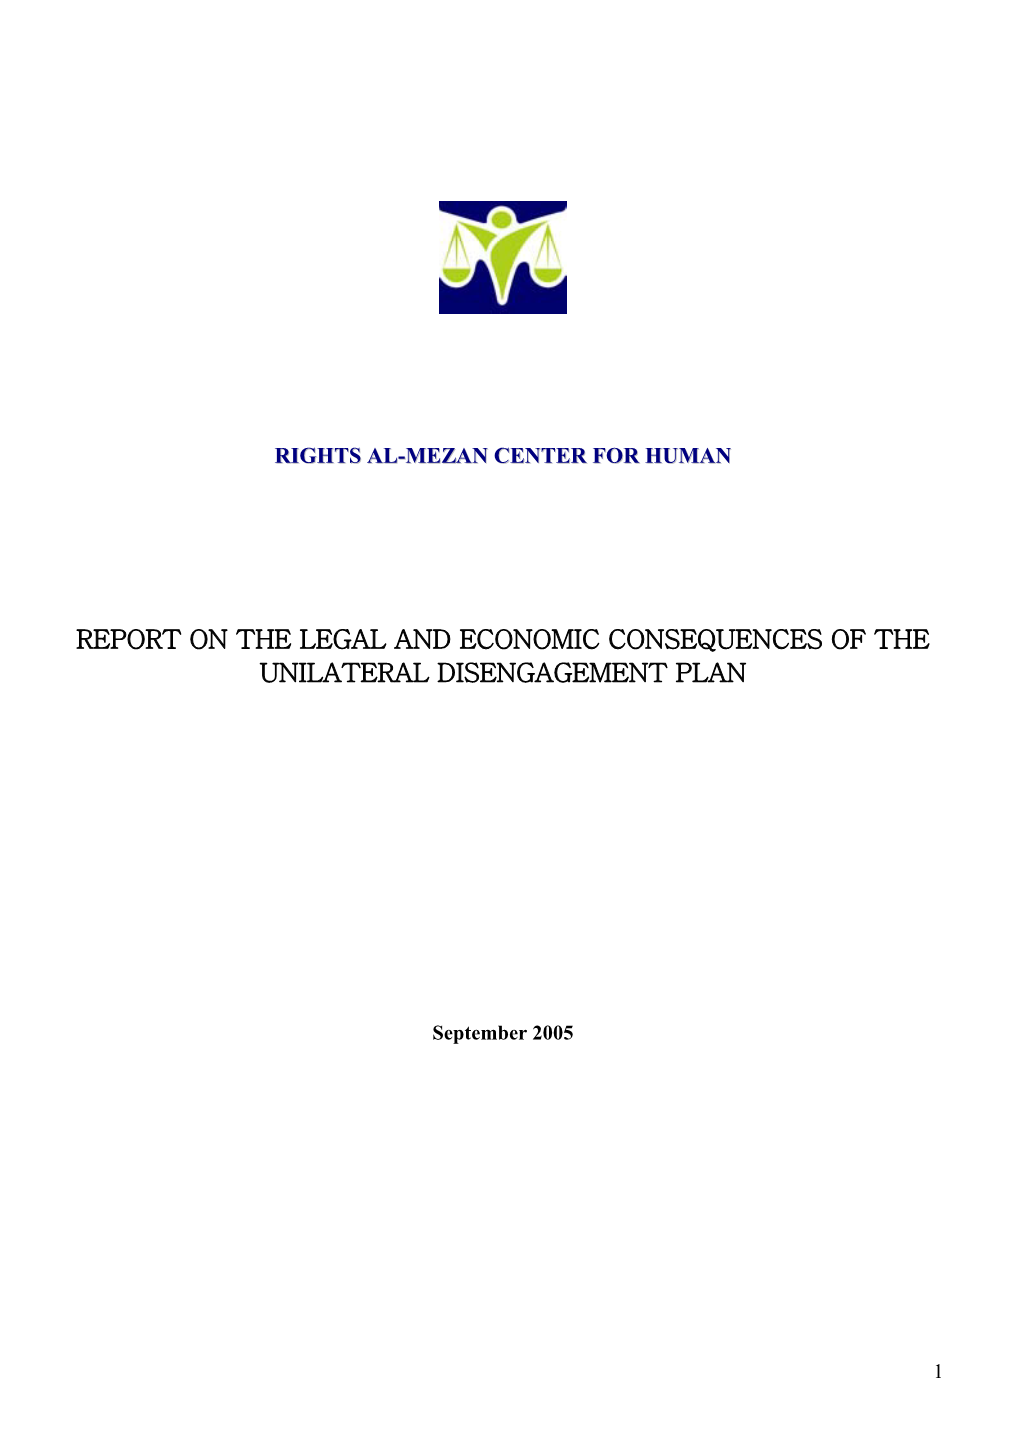 Report on the Legal and Economic Consequences of the Unilateral Disengagement Plan